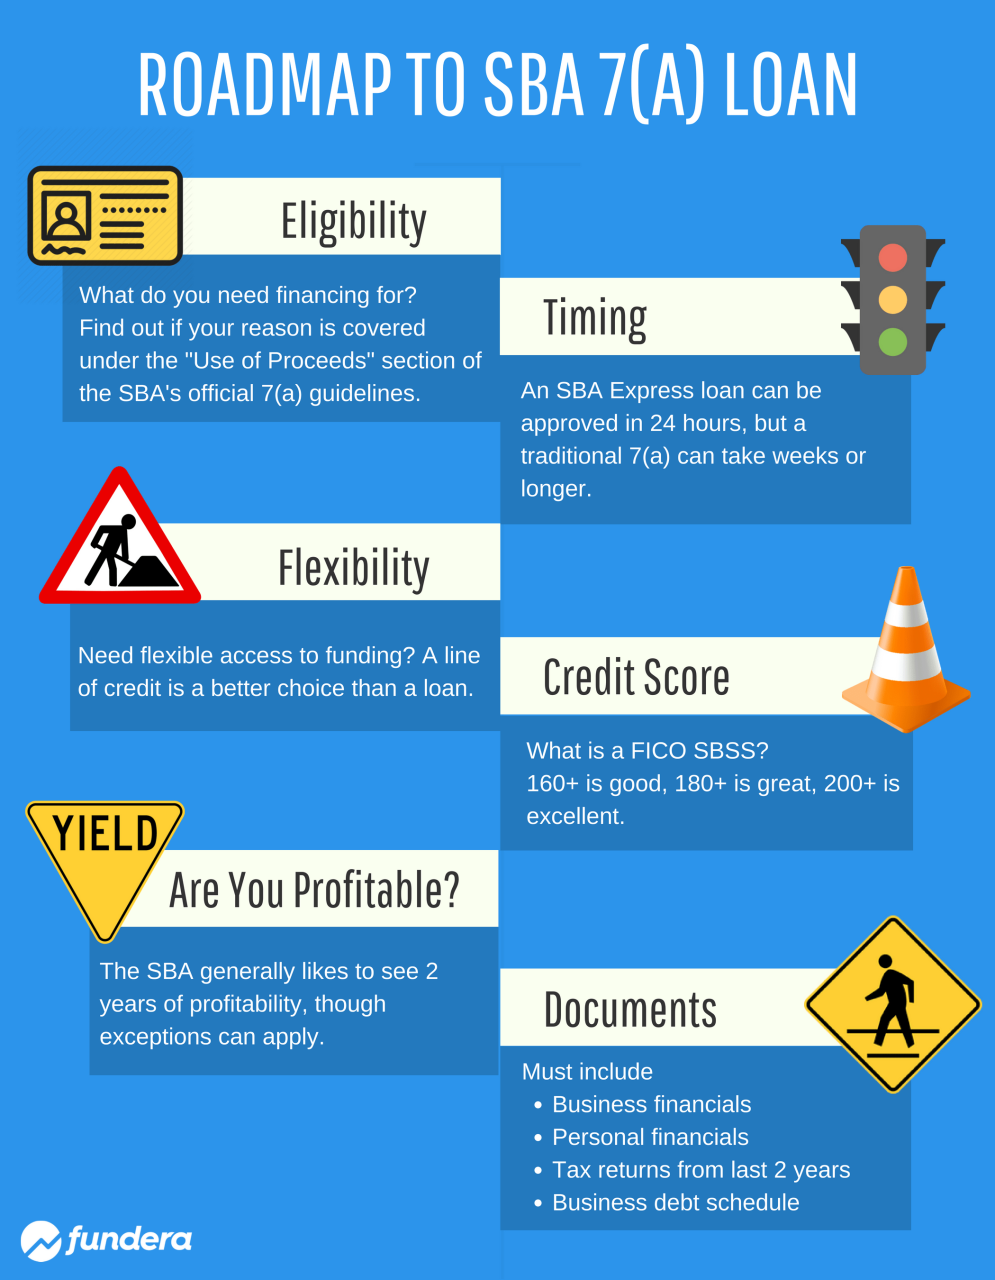 The Roadmap to an SBA 7(a) Loan (Infographic)